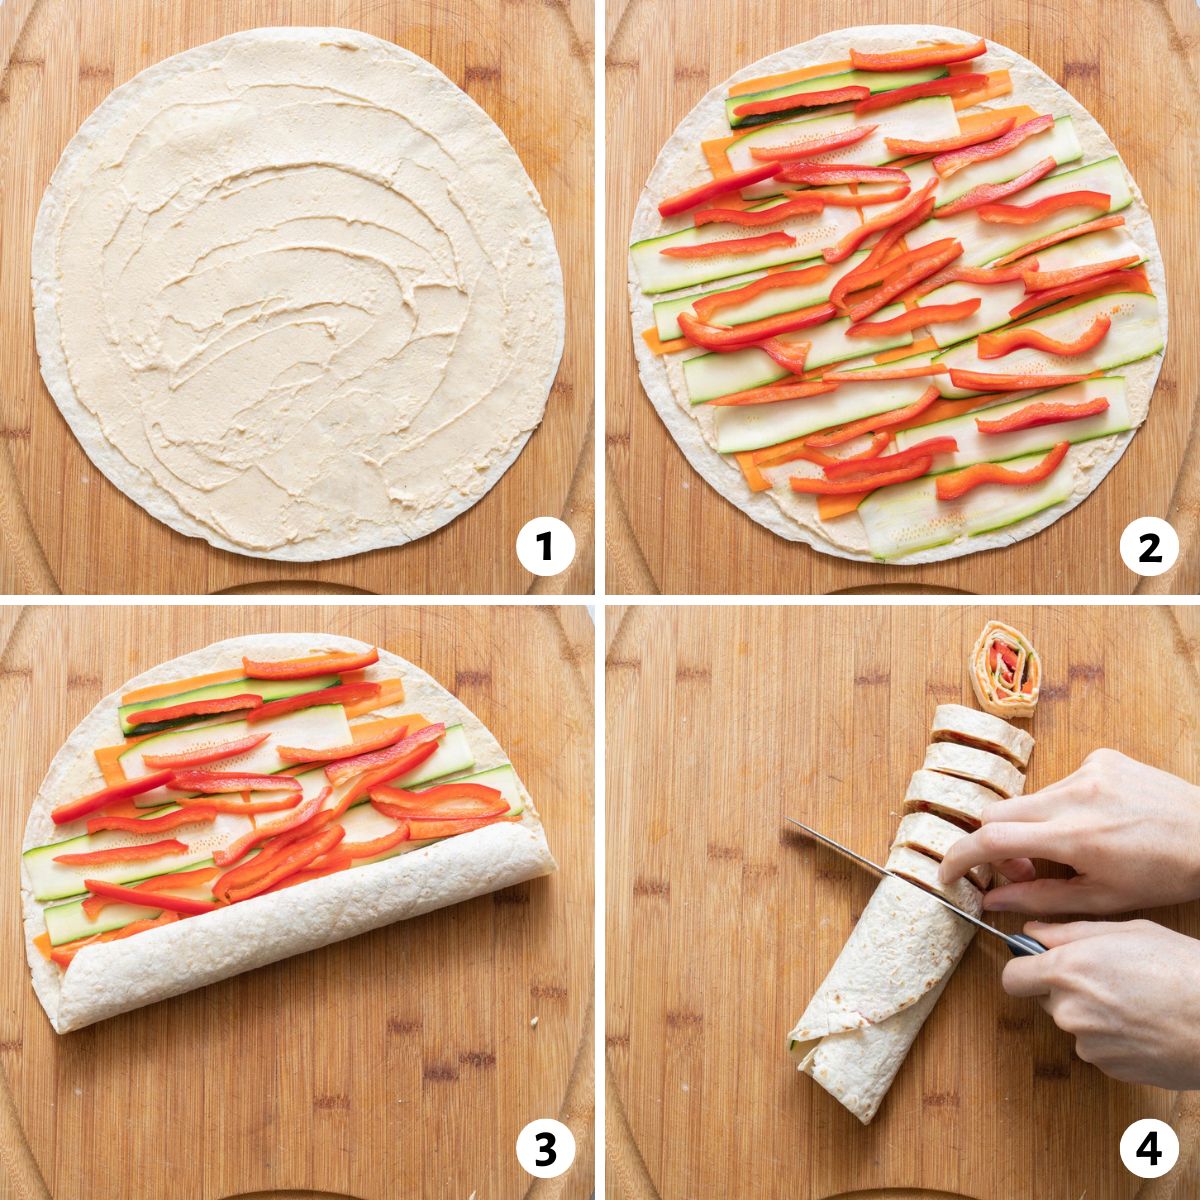 4 image collage on how to make a pinwheel sandwich recipe: spread hummus, add bell pepper and zucchini, roll tortilla shell, slice into thin rings.